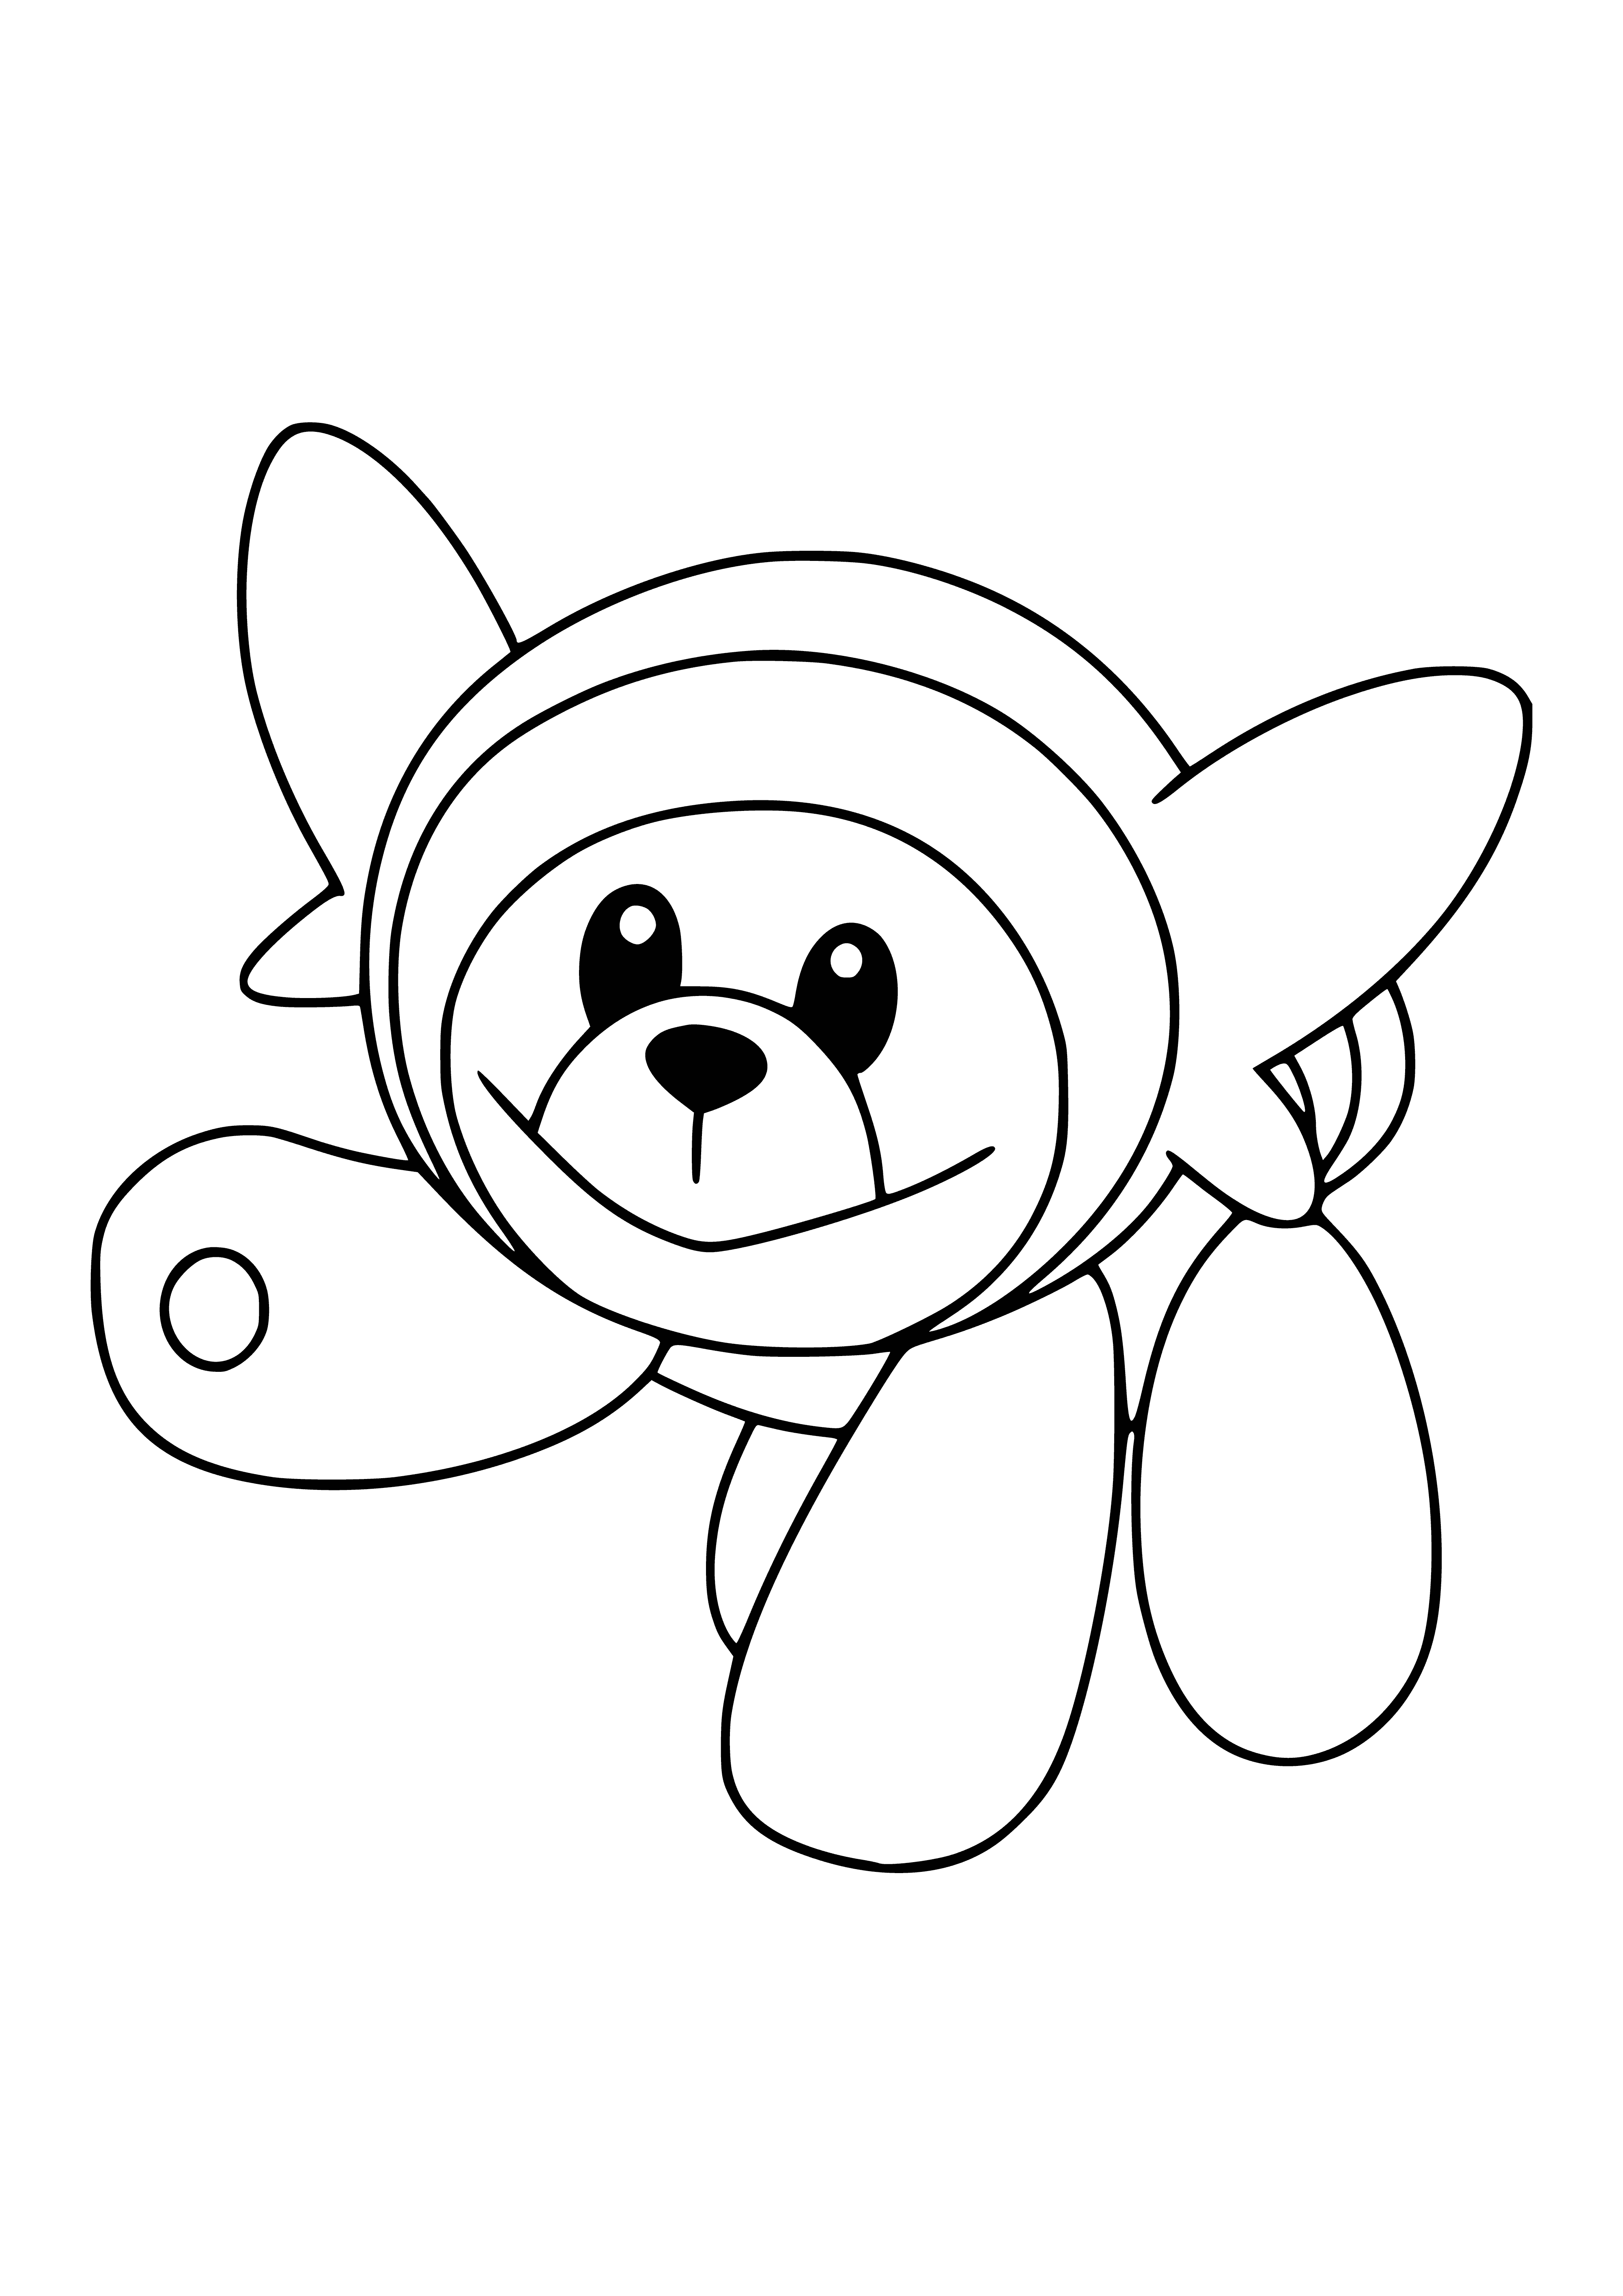 coloring page: Small, round, furry Pokemon w/large ears, brown body, cream stomach, tail & face, small black eyes & feet.